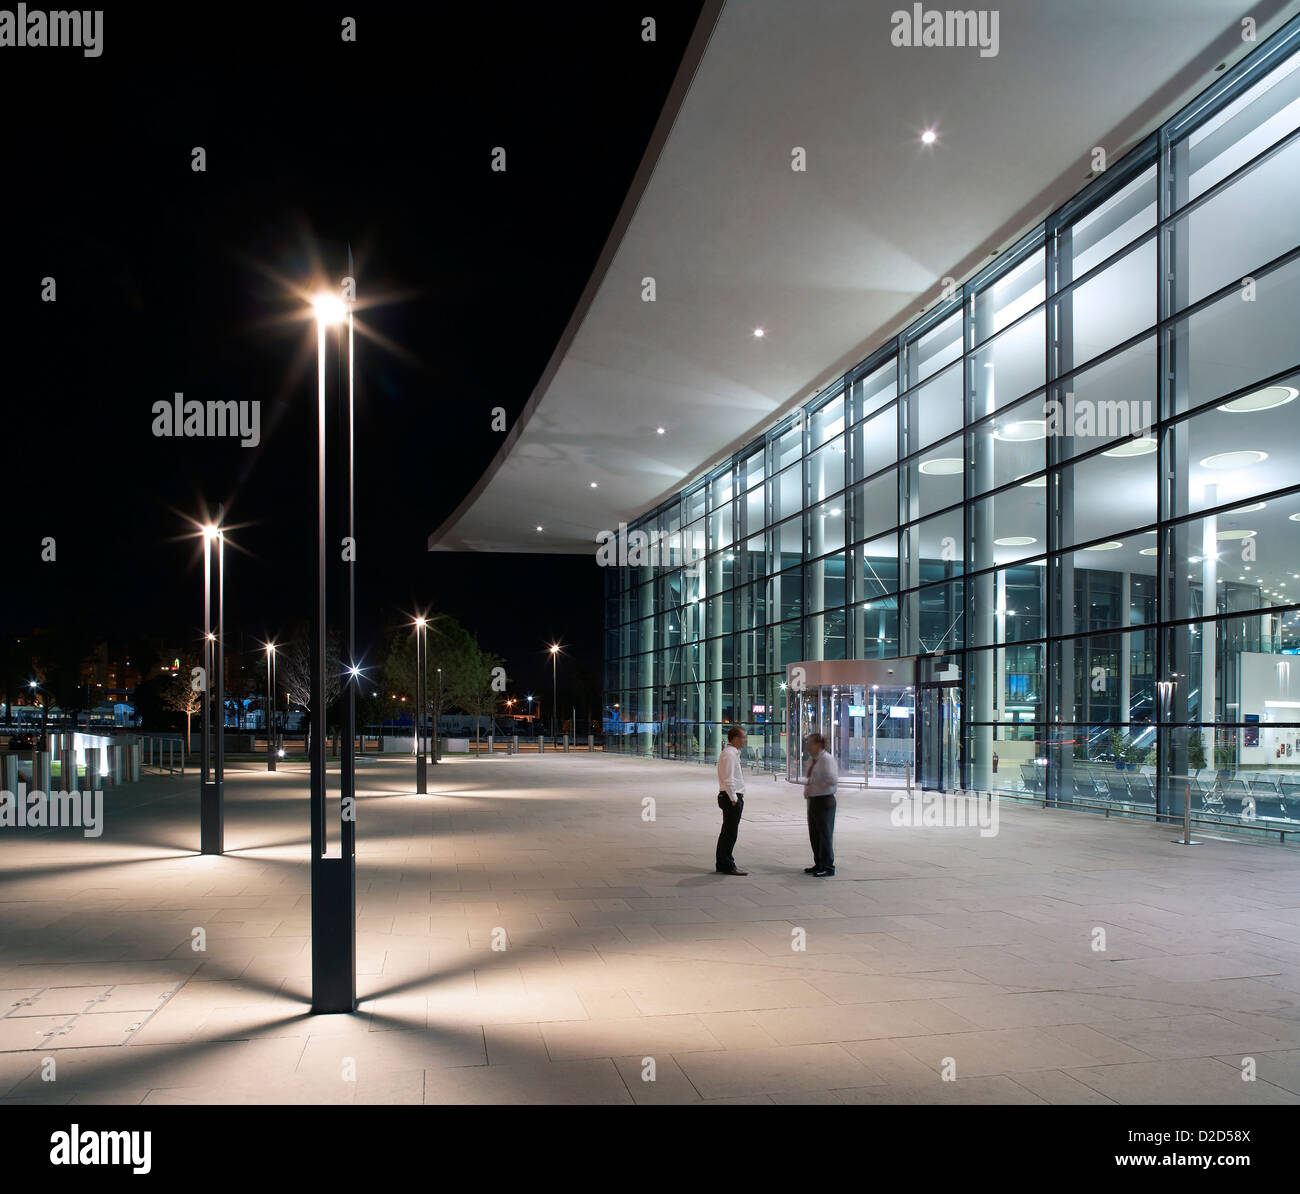 Gibraltar Airport, Gibraltar, United Kingdom. Architect: Bblur Architecture, 2012. Detailed perspective of arrival area at night Stock Photo